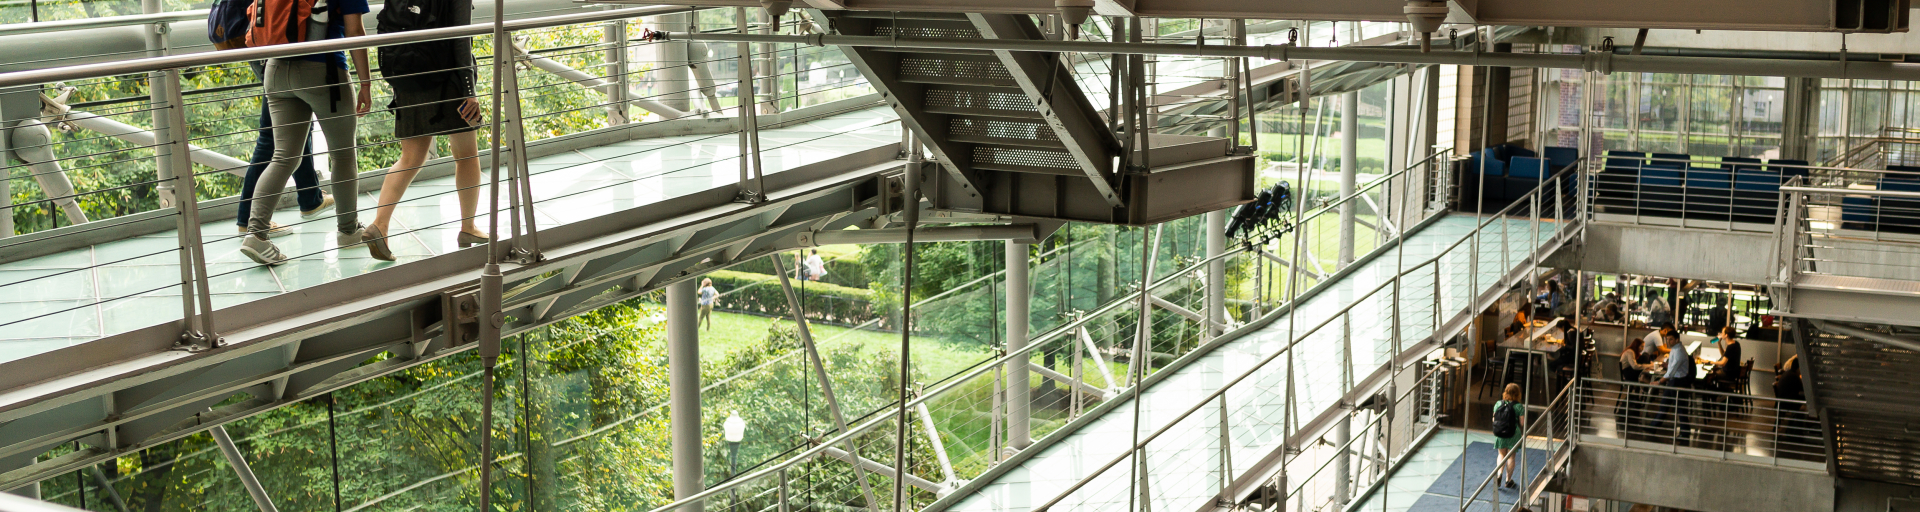 Three students travel down the walkways together. The entire side of the building is glass and greenery can be seen outside.